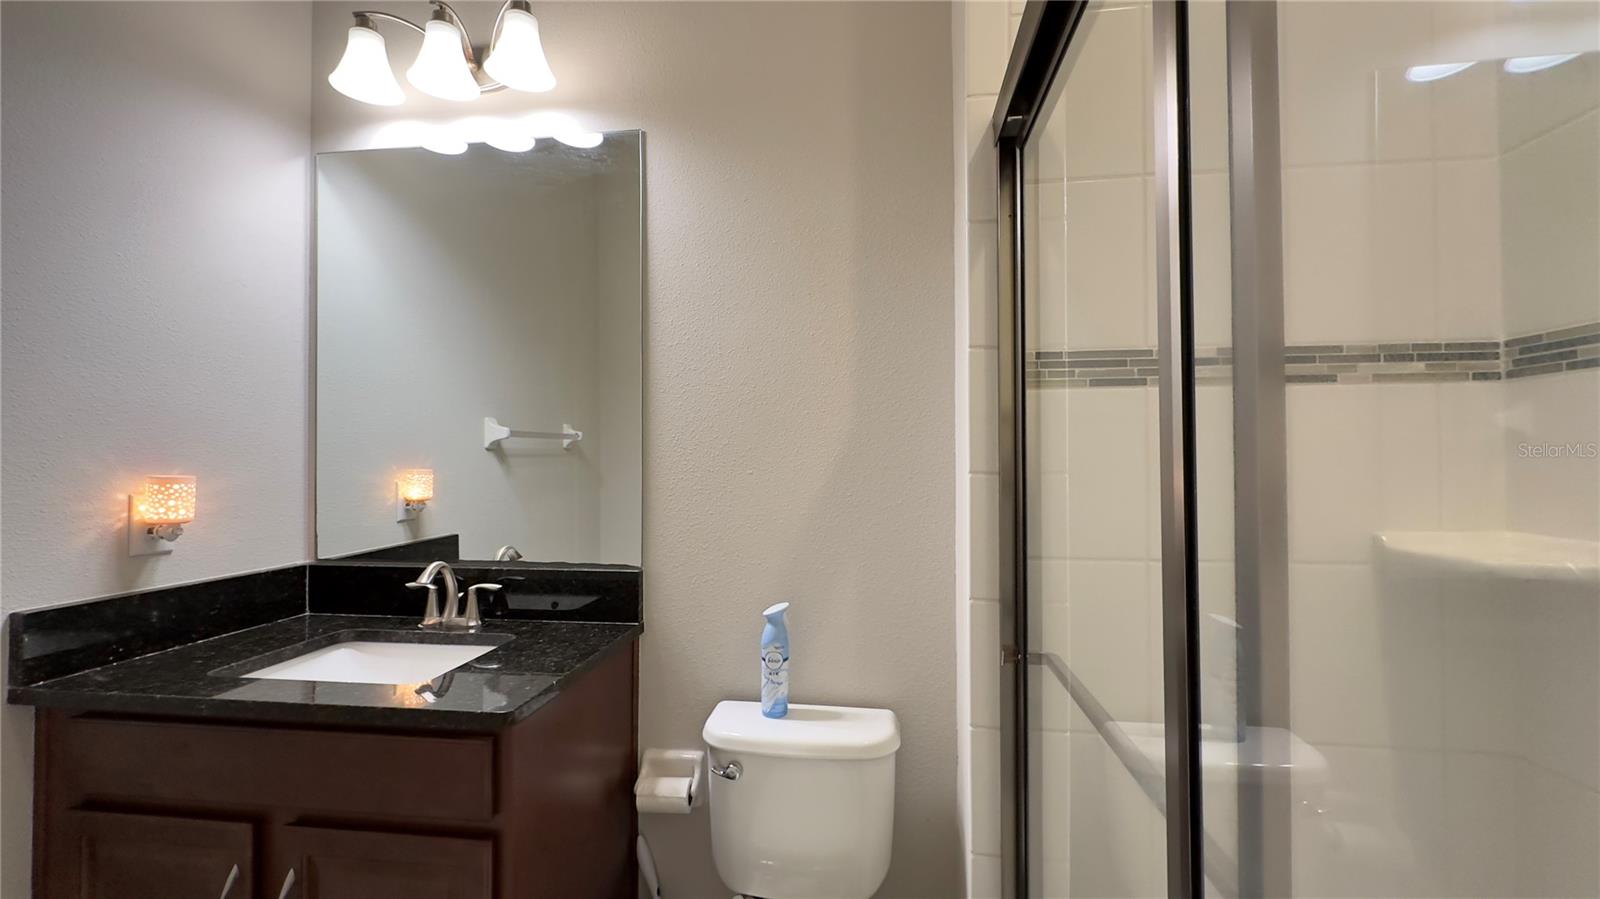 Full bath Bathroom #2 is conveniently adjacent to Bedroom #2, and luxuriously refreshes with granitecounters…